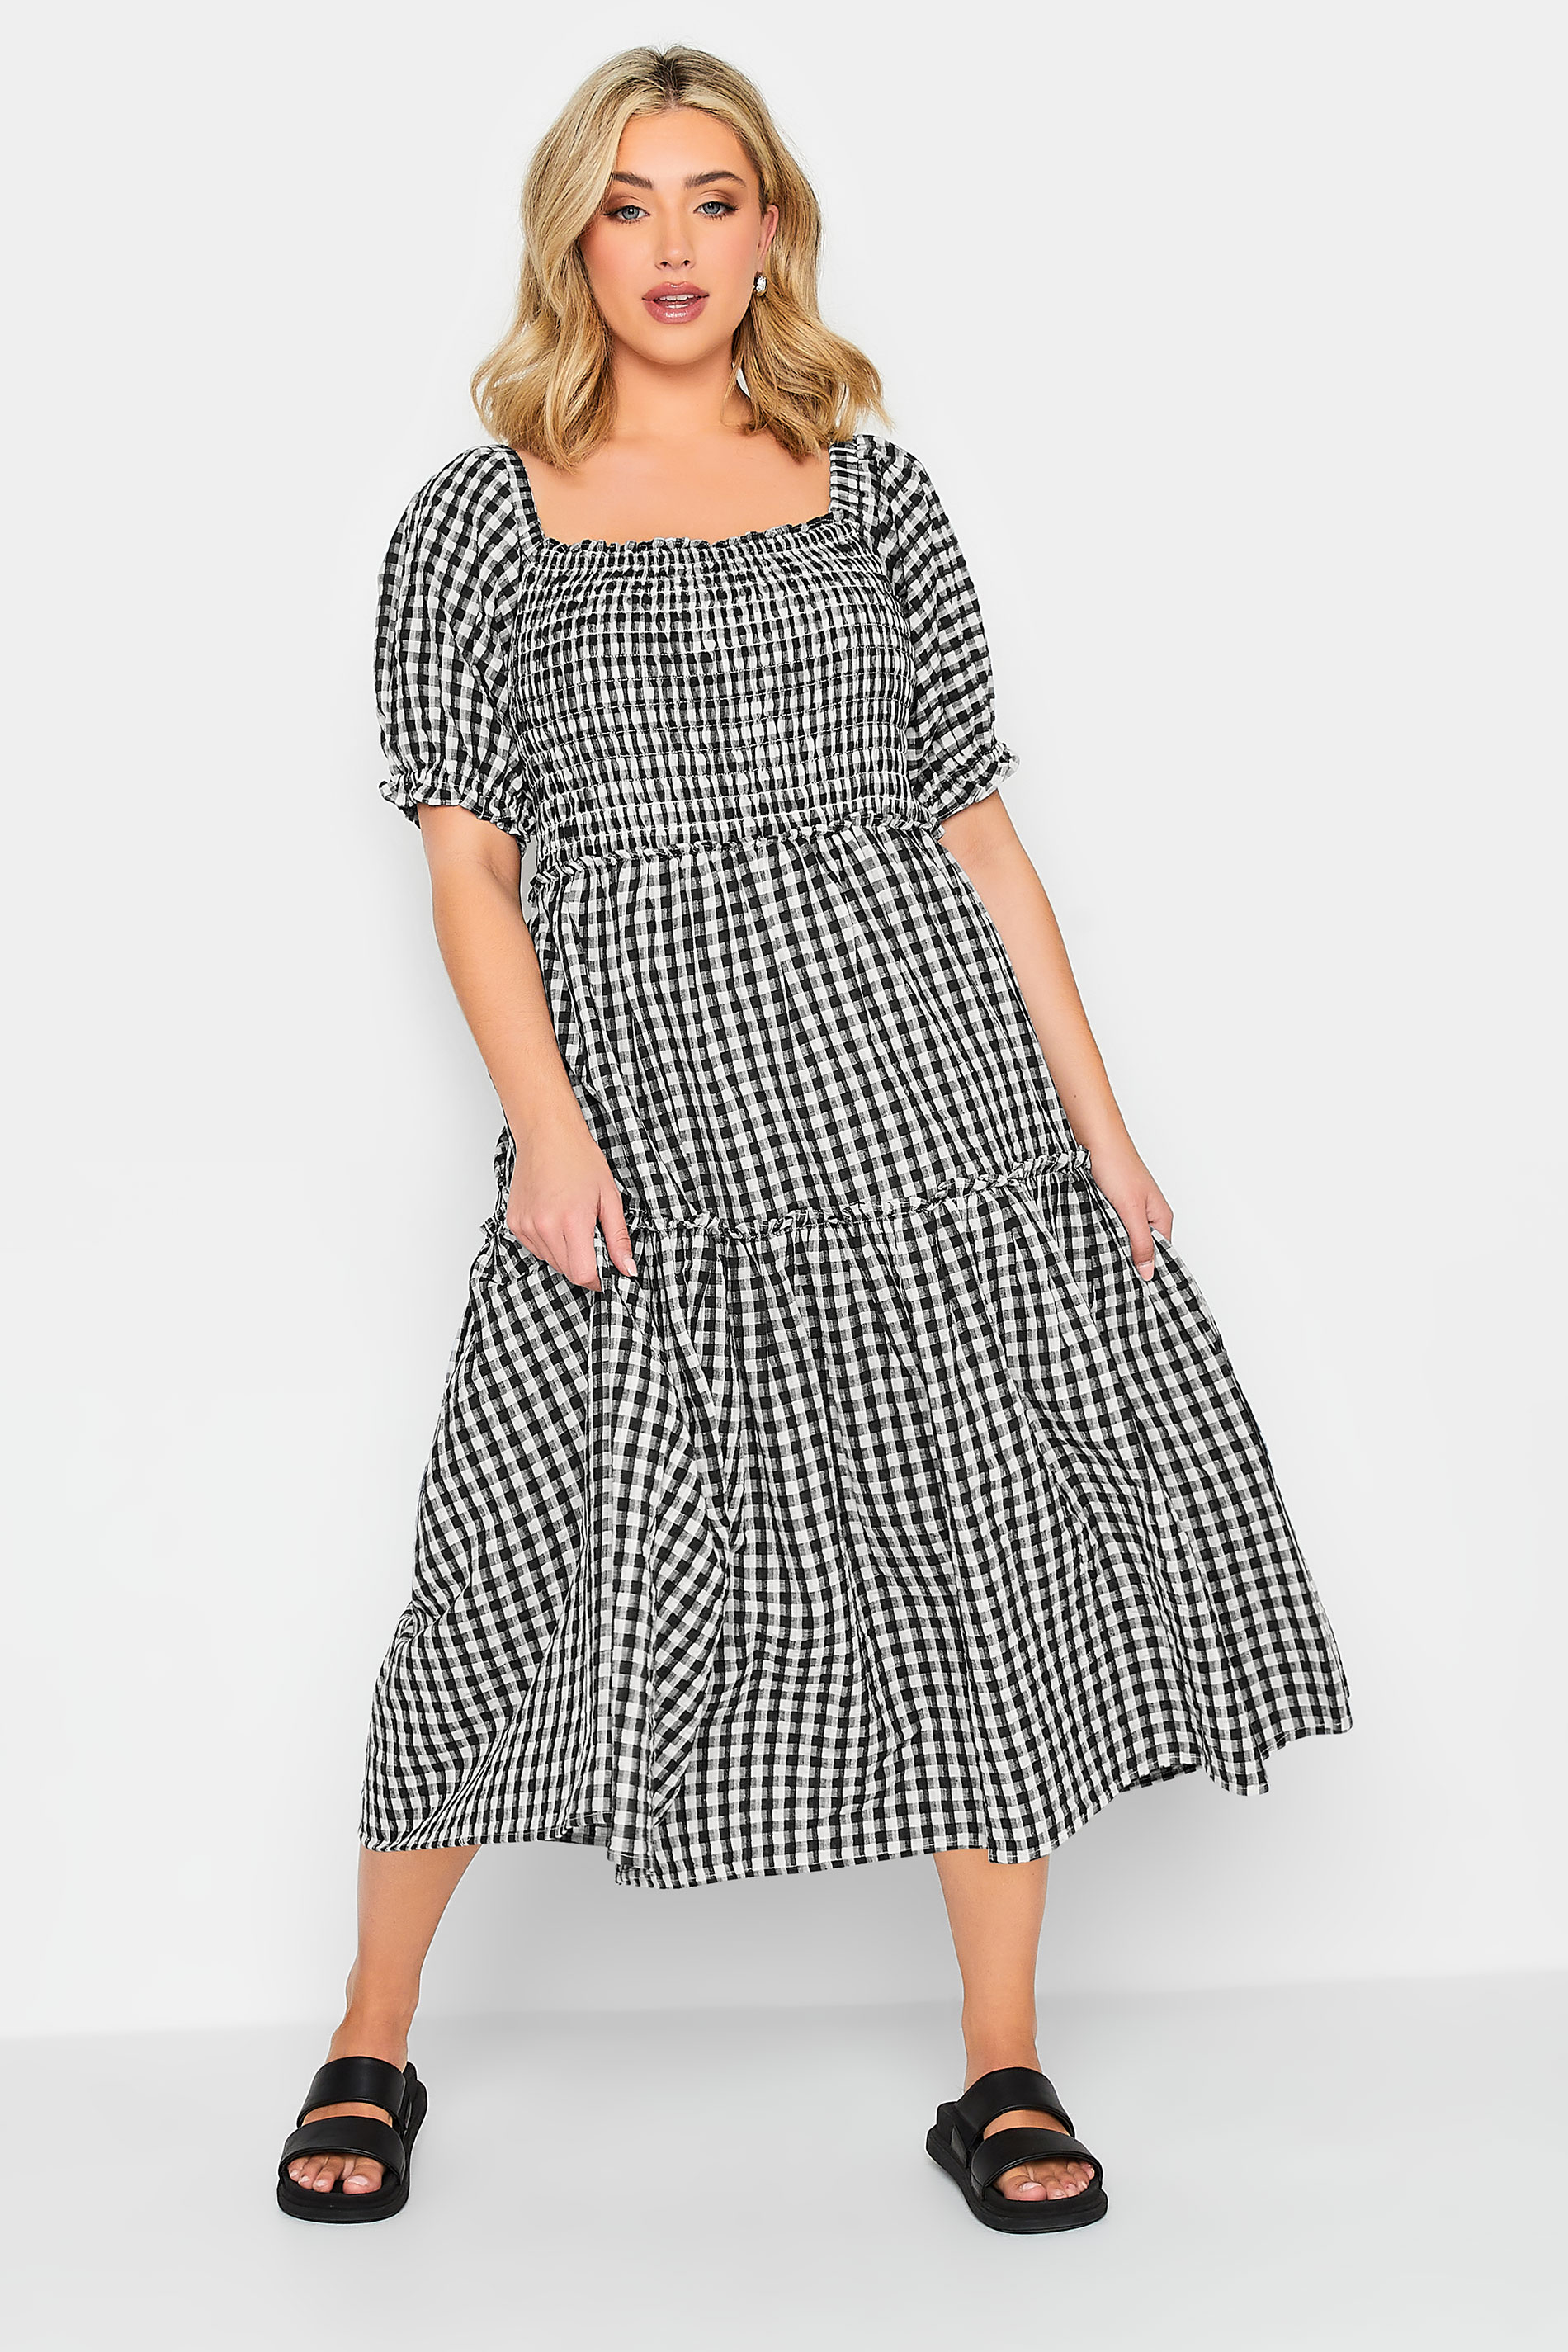 YOURS PETITE Plus Size Black Gingham Print Shirred Midaxi Dress | Yours Clothing 1